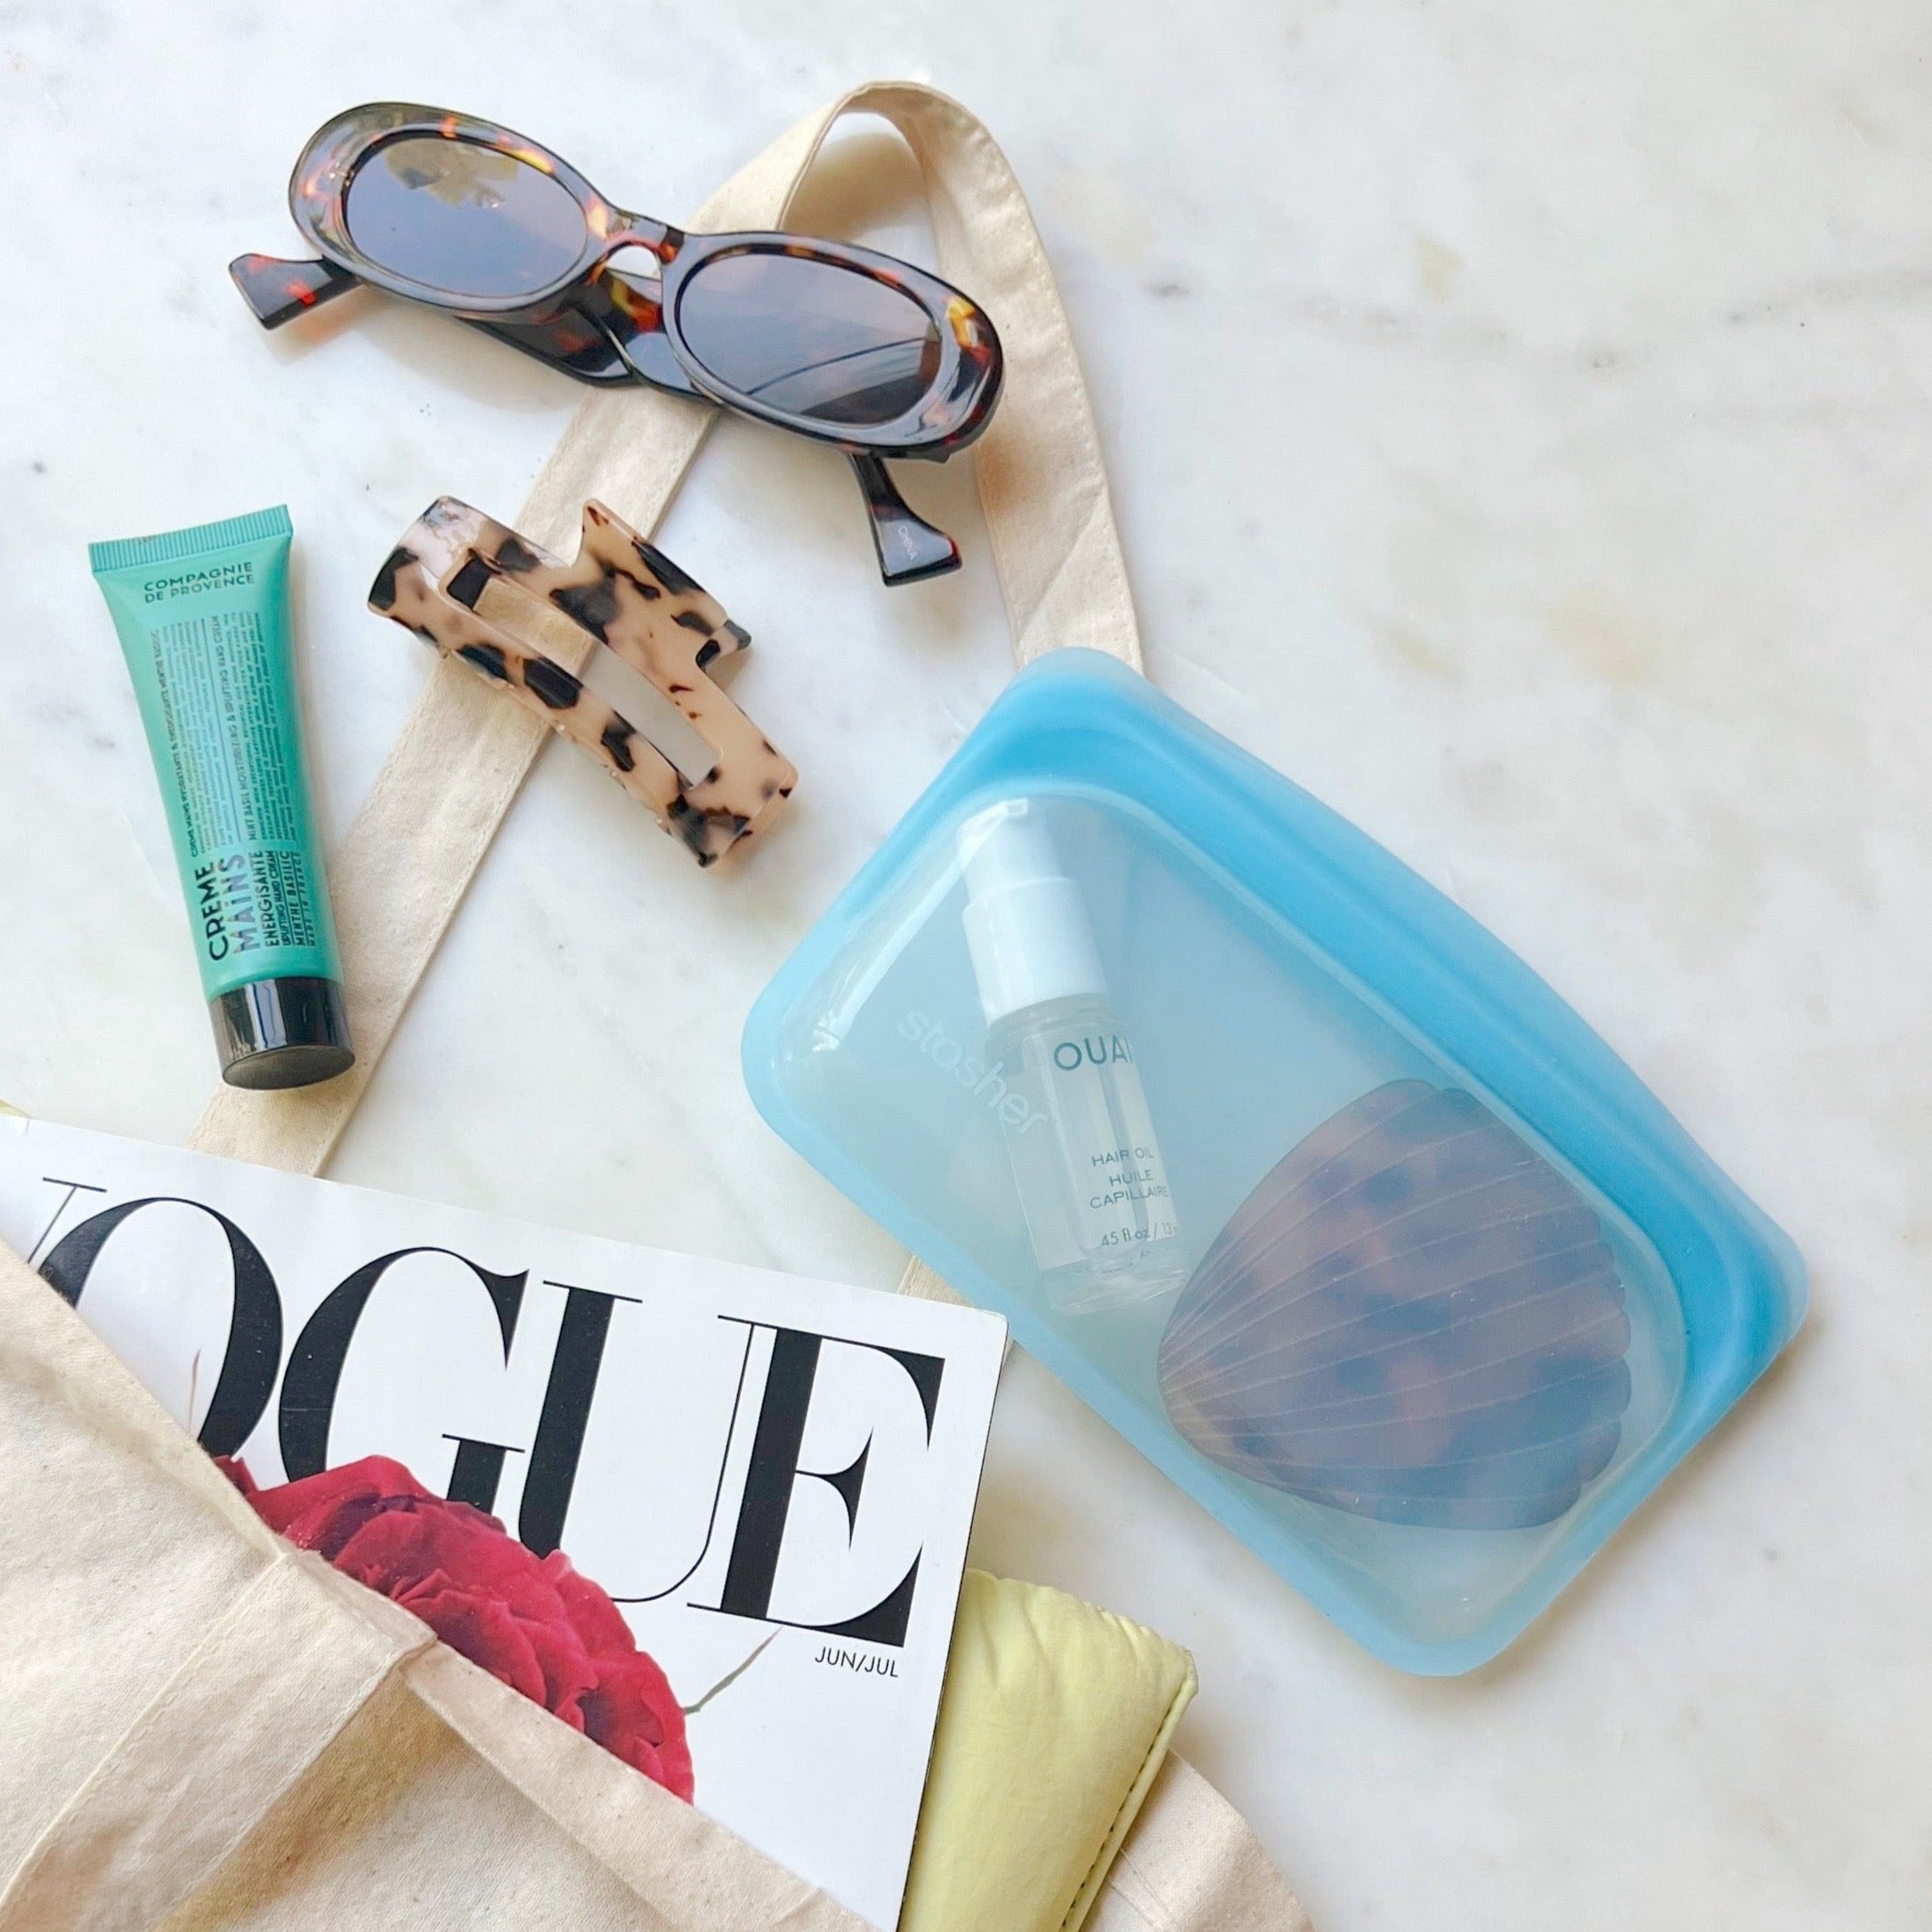 Small blue bag filled with hair essentials spilling out from tote bag.